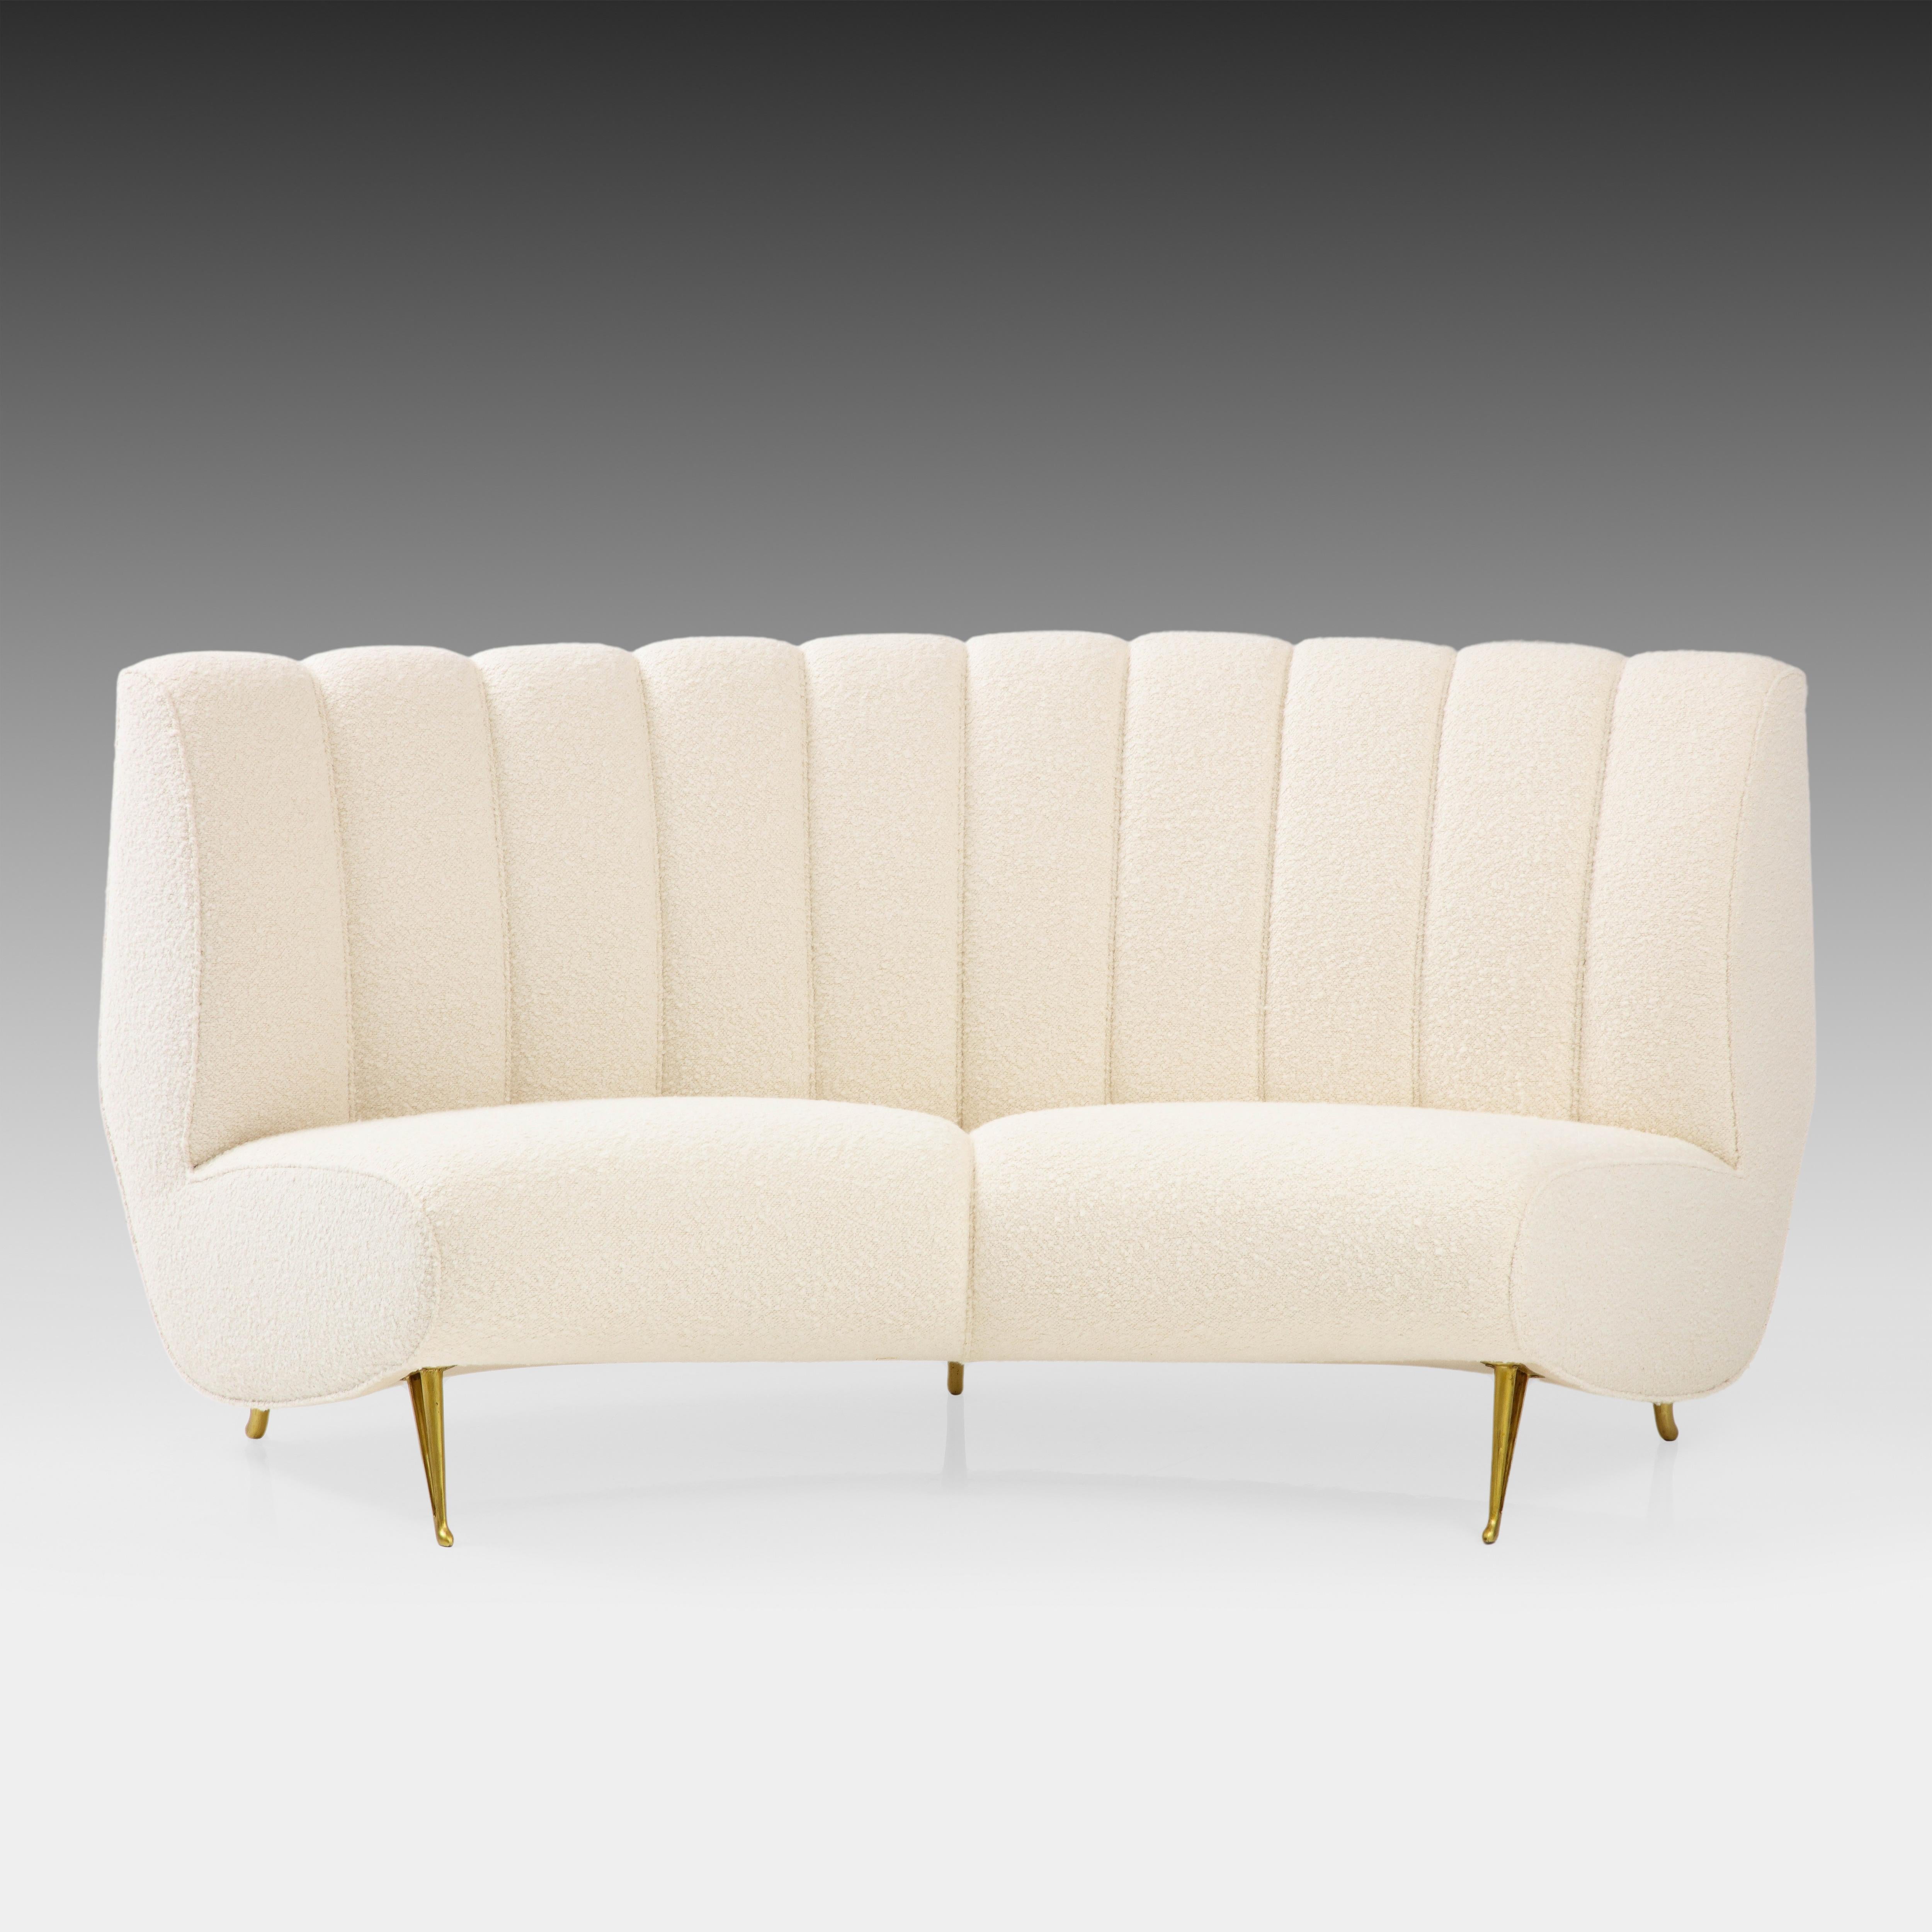 ISA Bergamo exquisite channel back curved settee with gilt metal legs in ivory bouclé, Italy, 1950s. This elegant settee has gentle curves throughout including its channel back, seat, and signature cutout gilt metal front legs and saber back legs